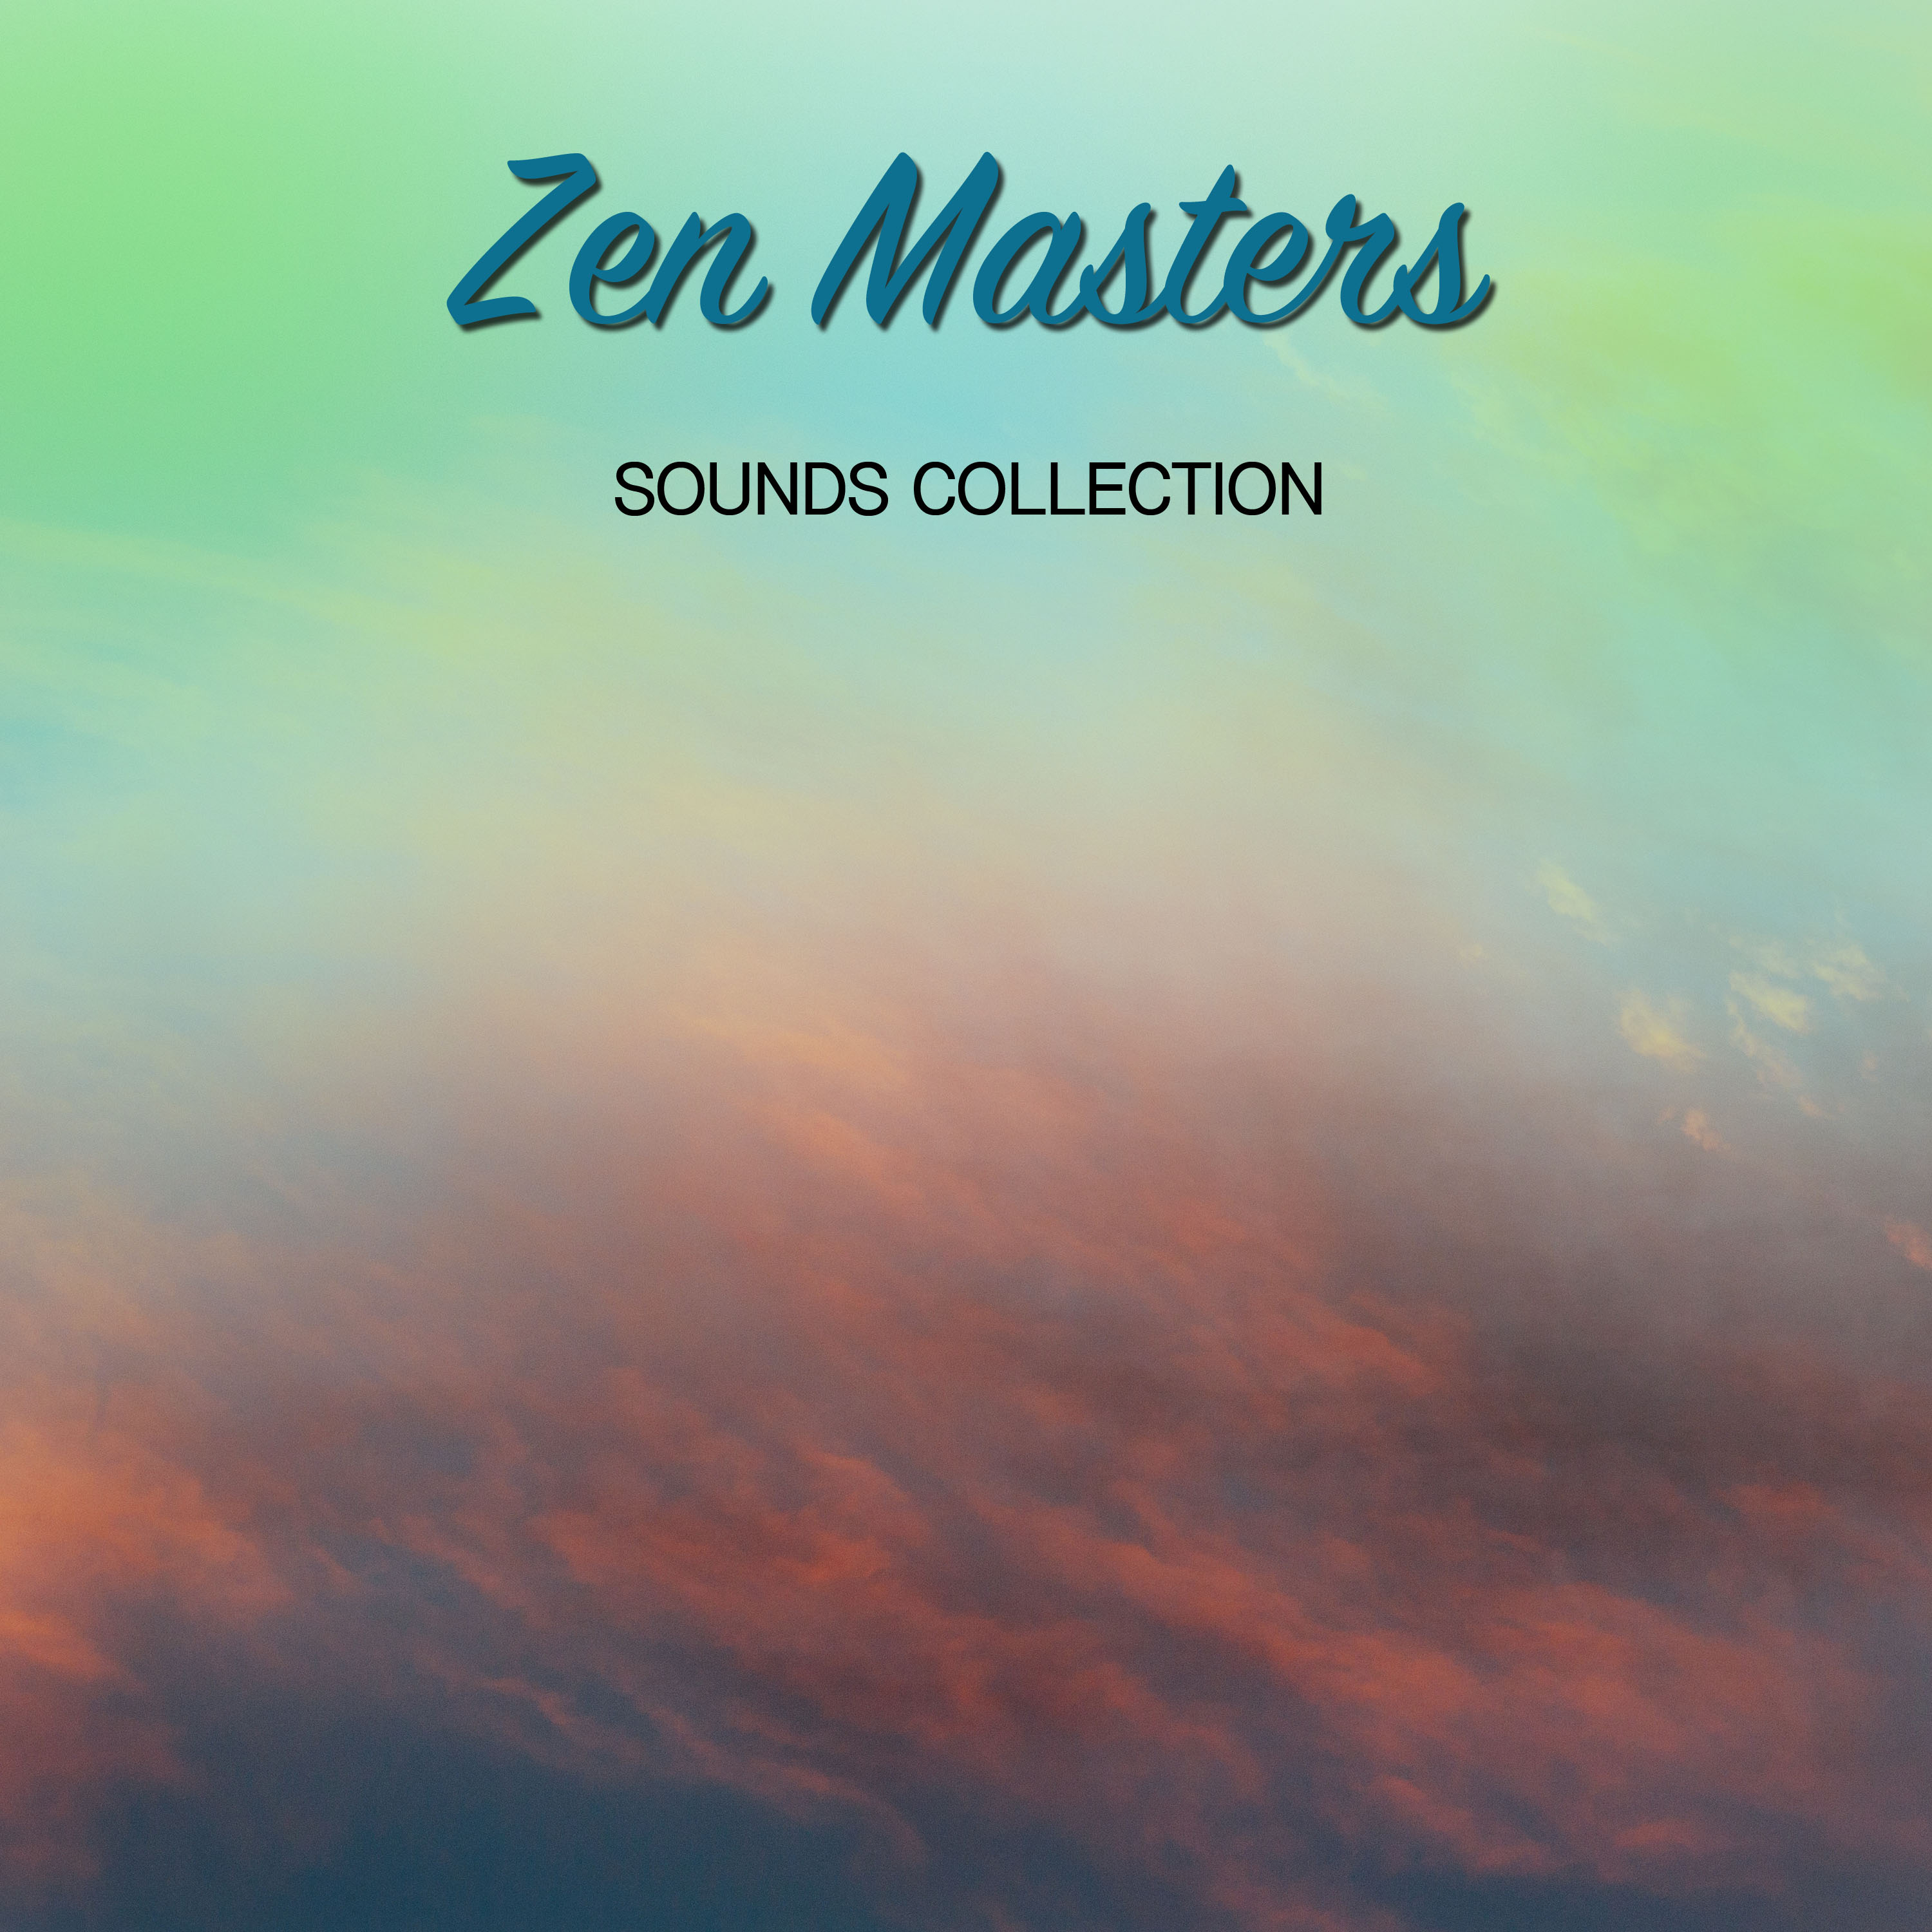 18 Buddhist Temple Zen Masters Sounds Collection